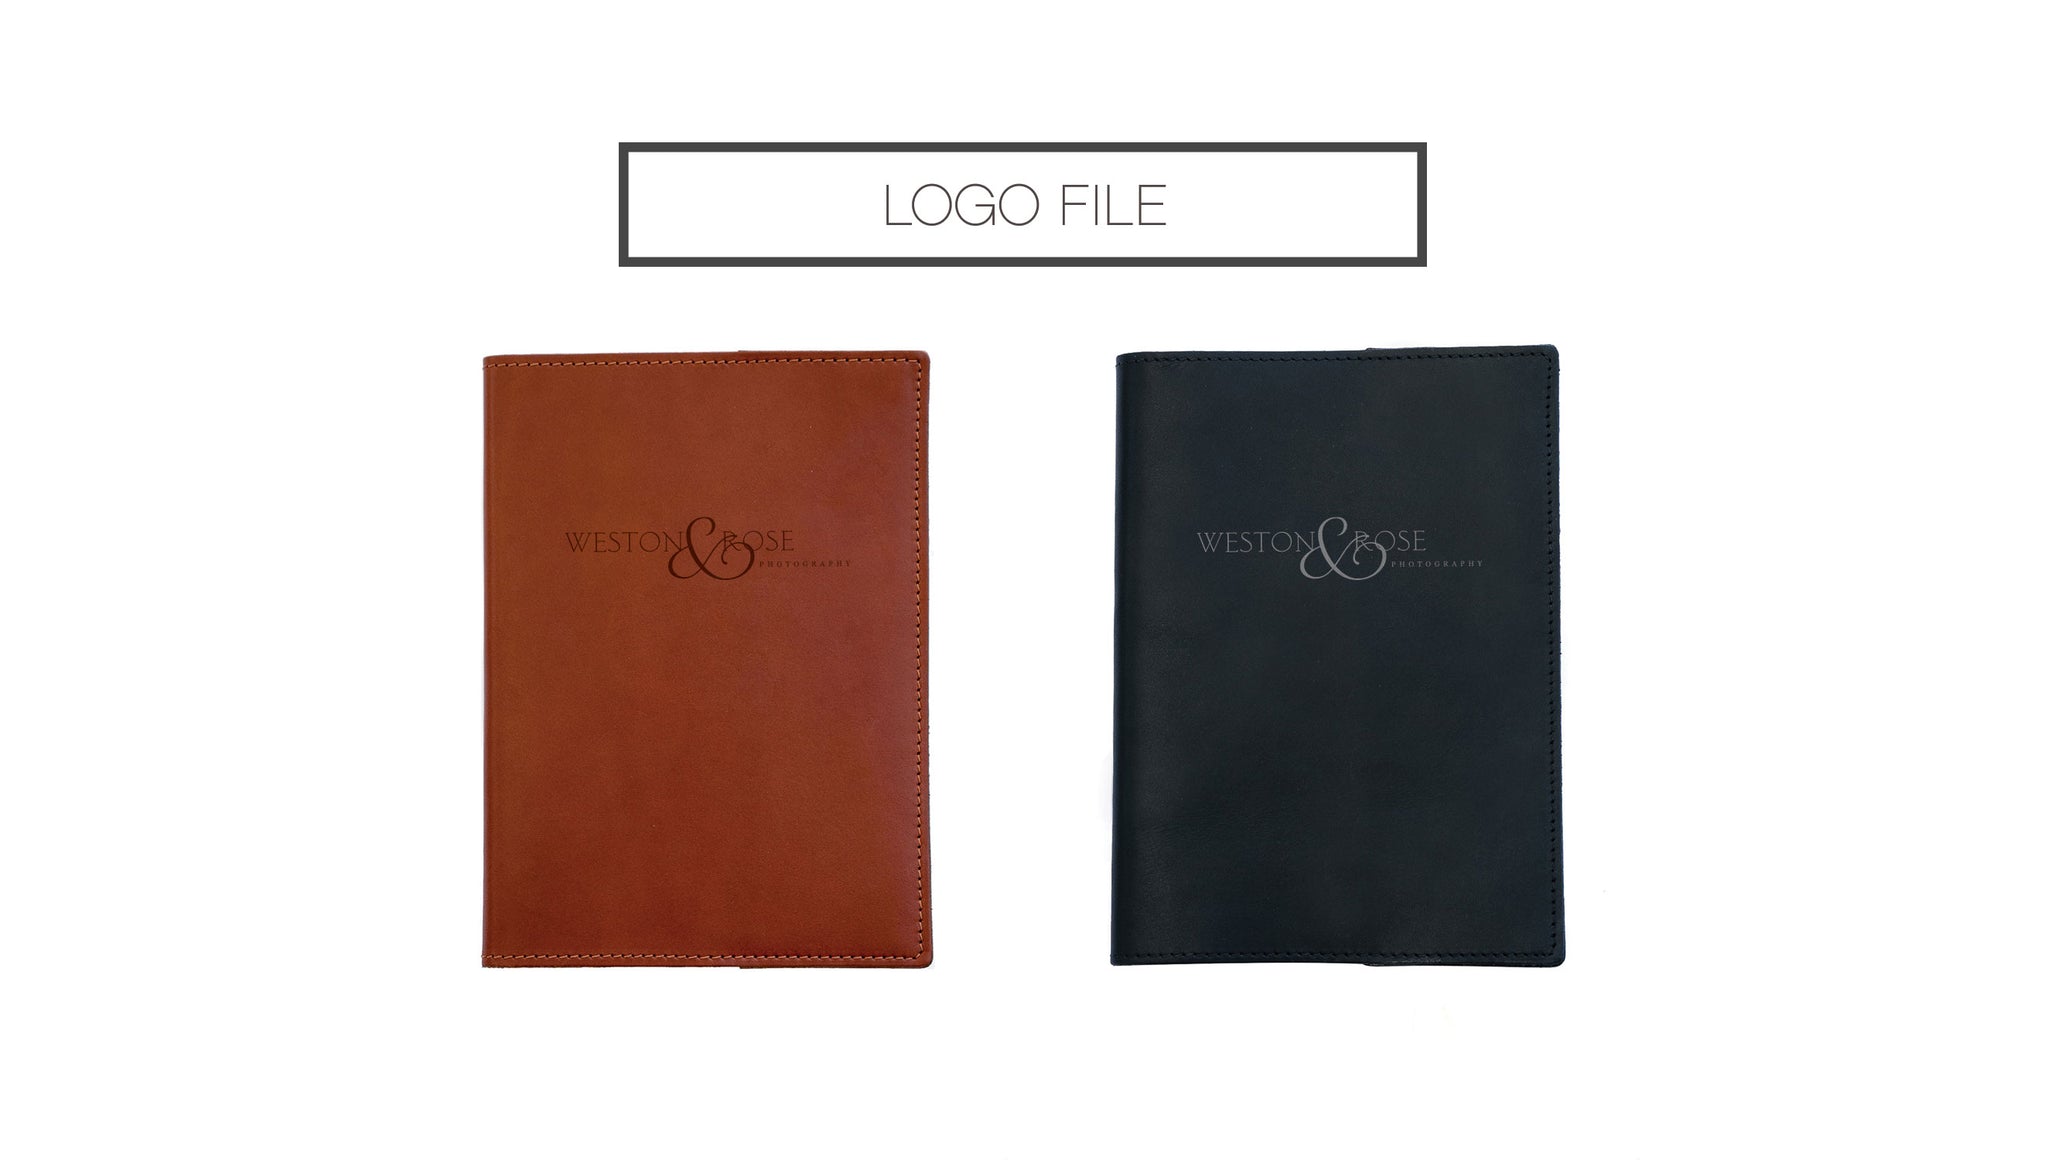 FOTO's genuine leather journal can be personalized with a custom design file or your business logo. Your JPG file must be completely black and white - no grayscale, color or photographs.